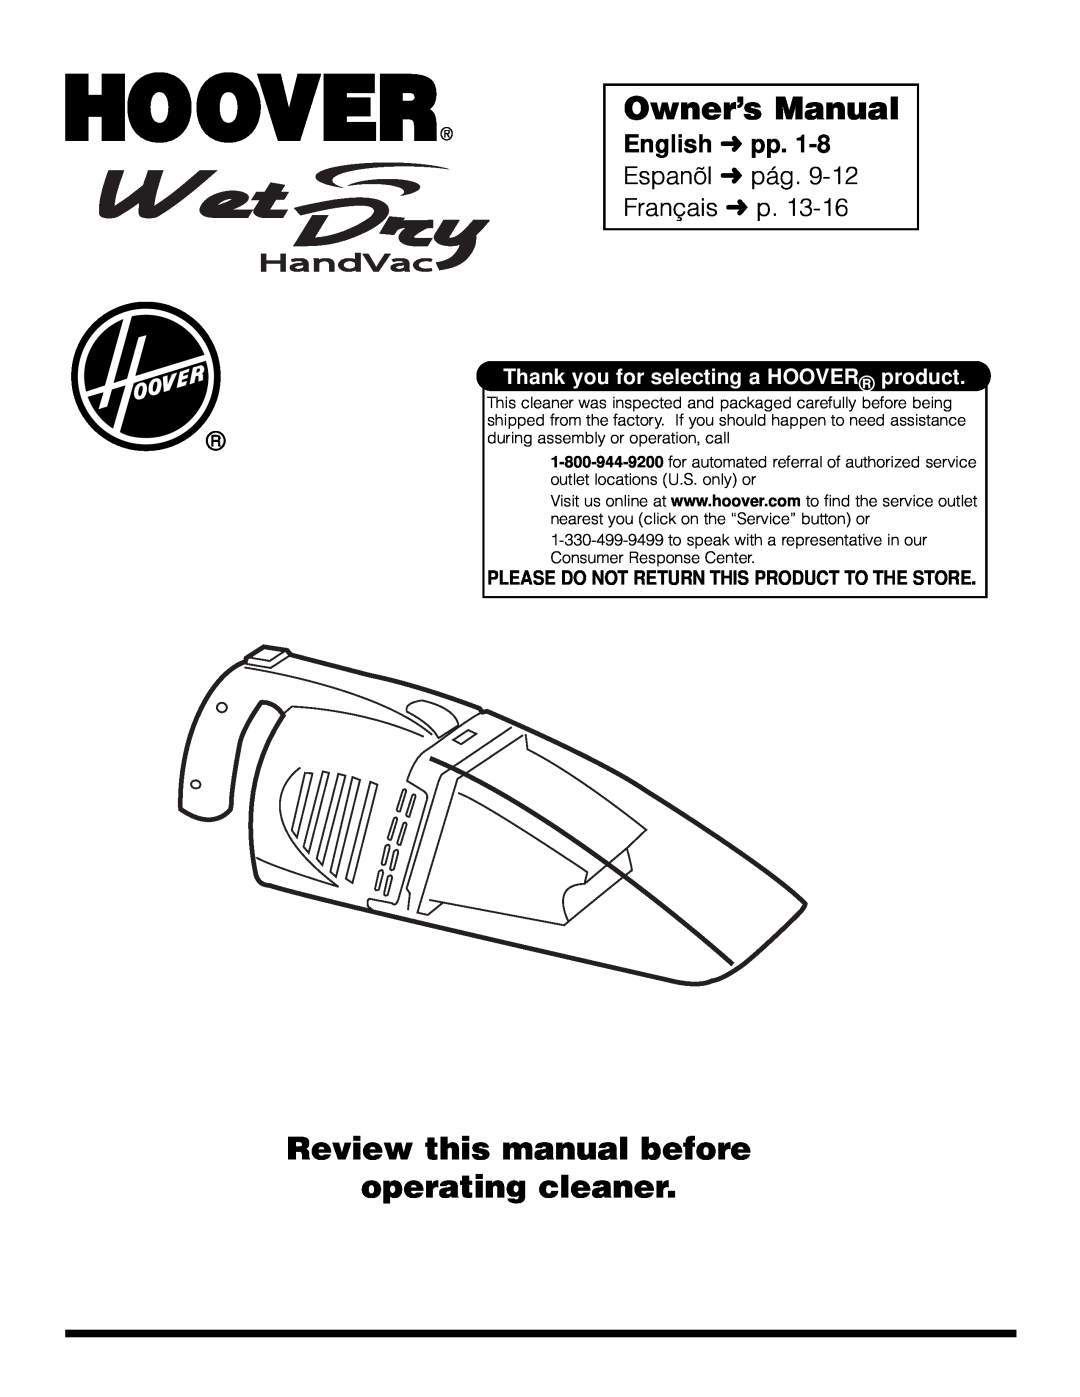 Hoover HandVac owner manual Owner’s Manual, Review this manual before operating cleaner, English pp 